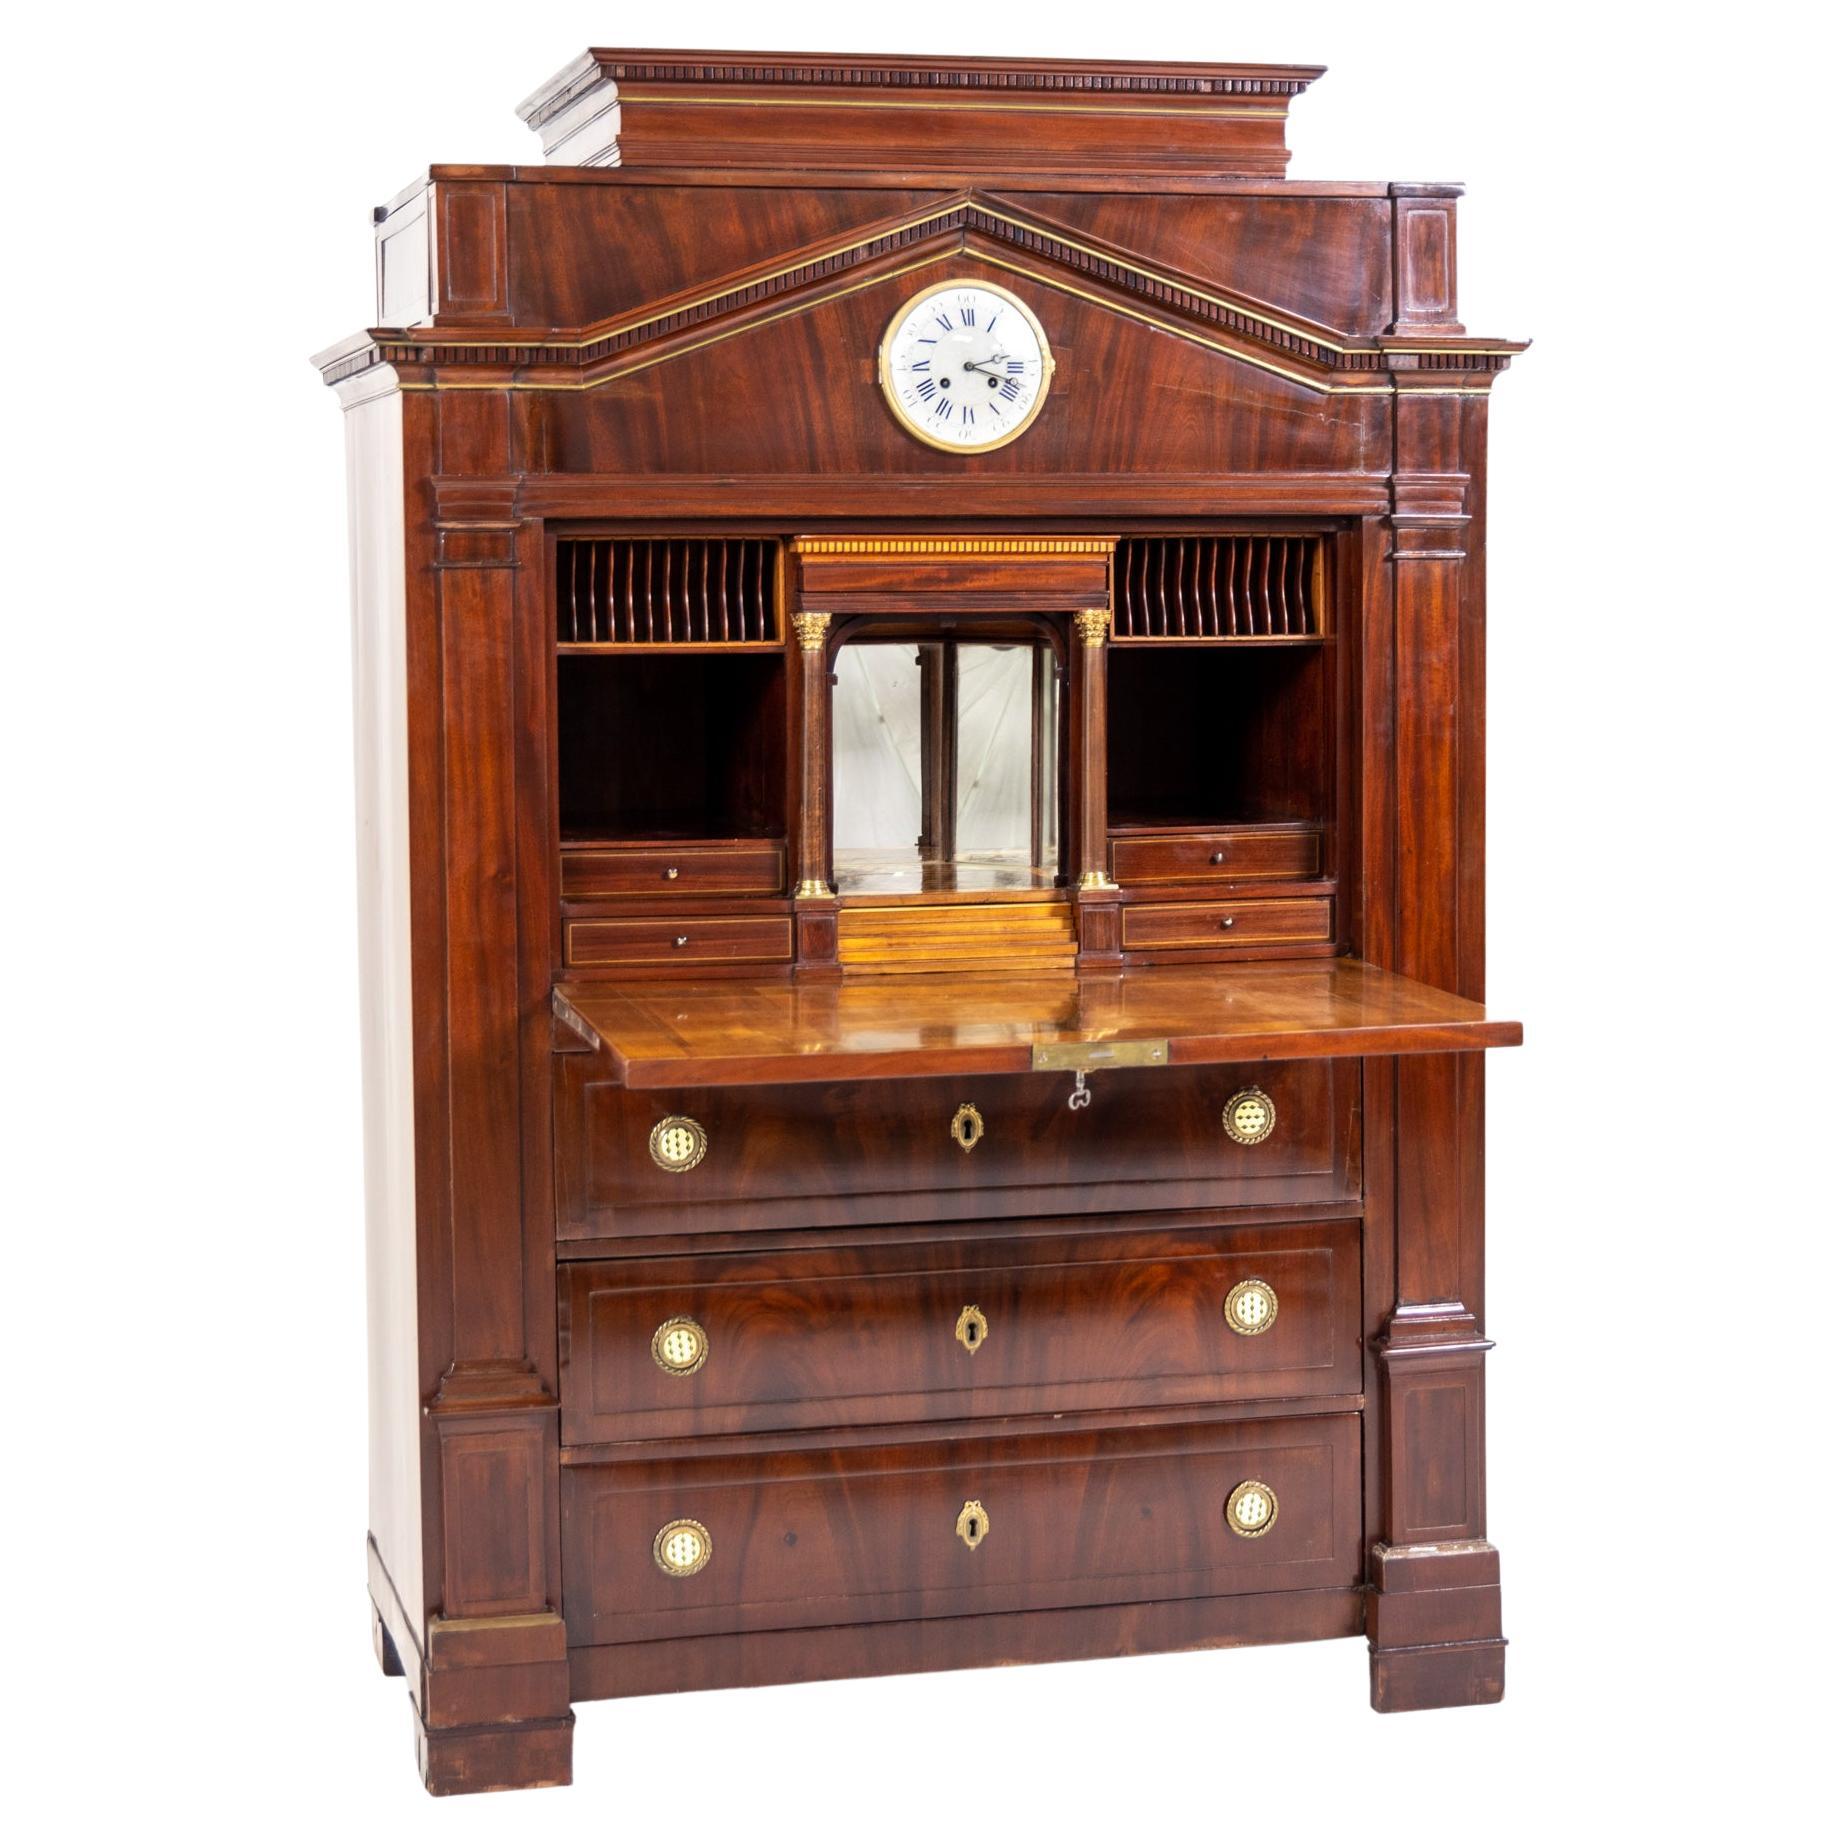 Neoclassiacal Mahogany Secretaire with Clock, Probably Berlin around 1800